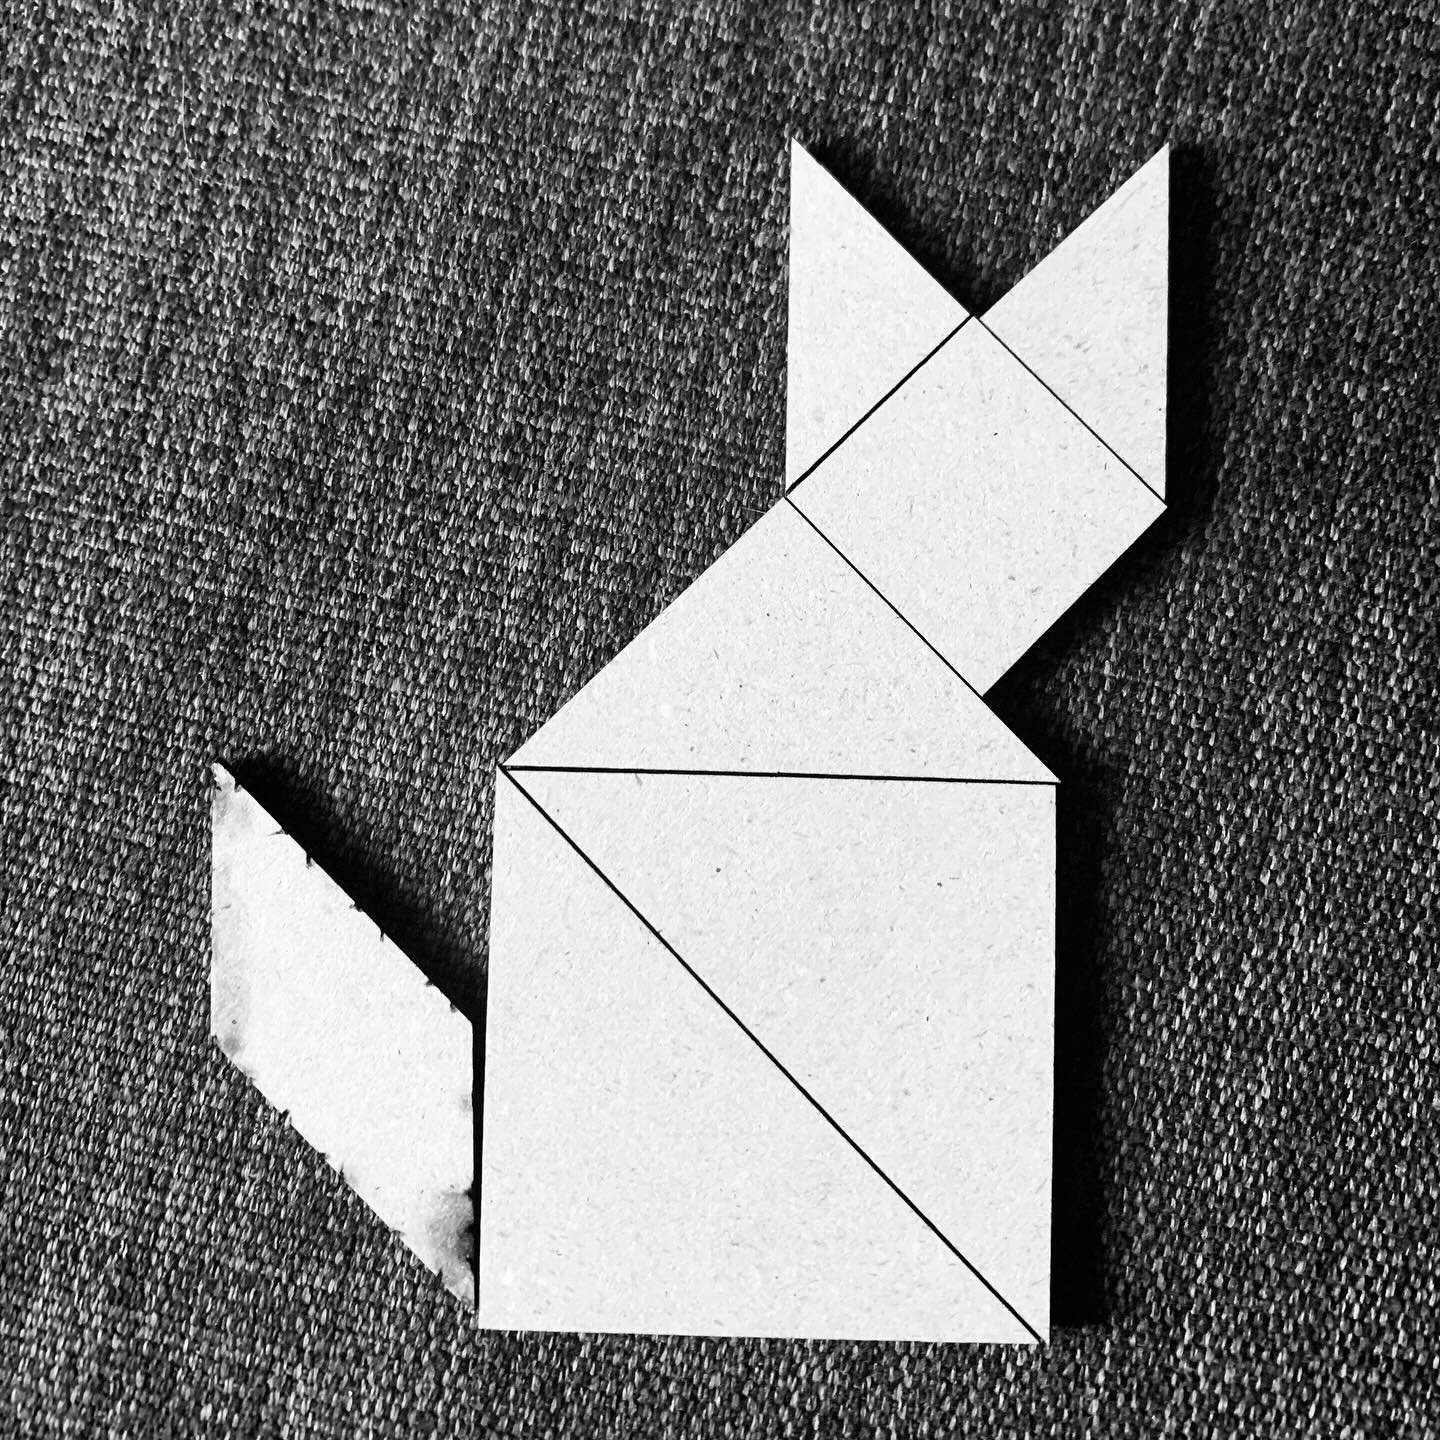 How were you kind to yourself today? For me it equated to playing with tangrams I cut at @fuse33calgary.

Love the simplicity of the geometric shapes that can turn into so many objects. Kinda like playing with a puzzle with many solutions. Art-based 